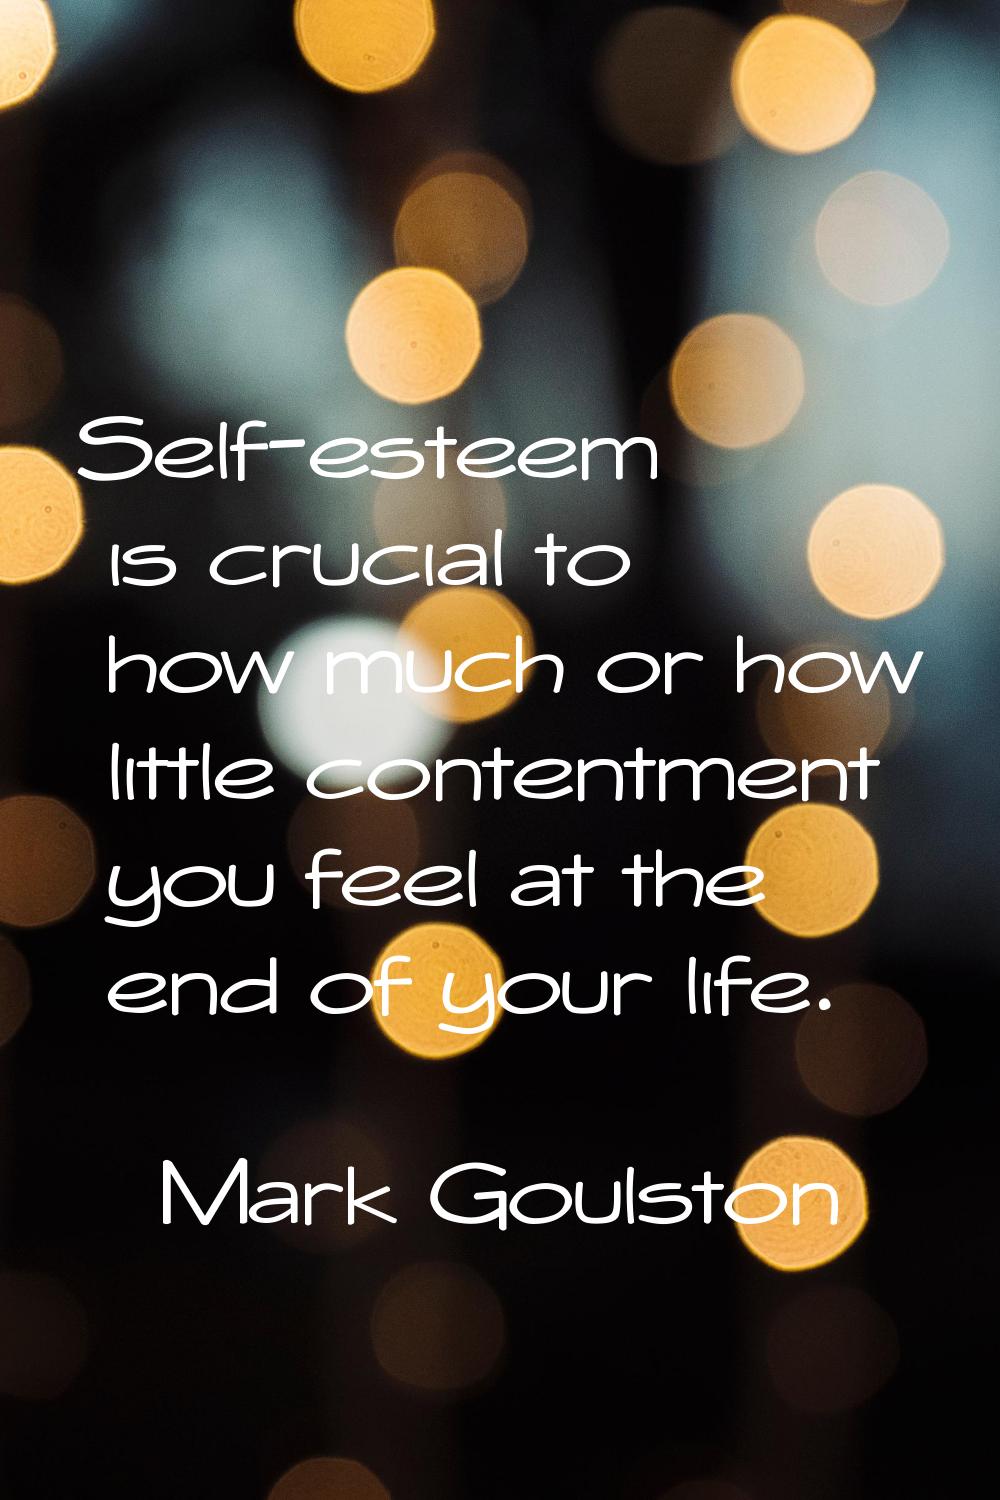 Self-esteem is crucial to how much or how little contentment you feel at the end of your life.